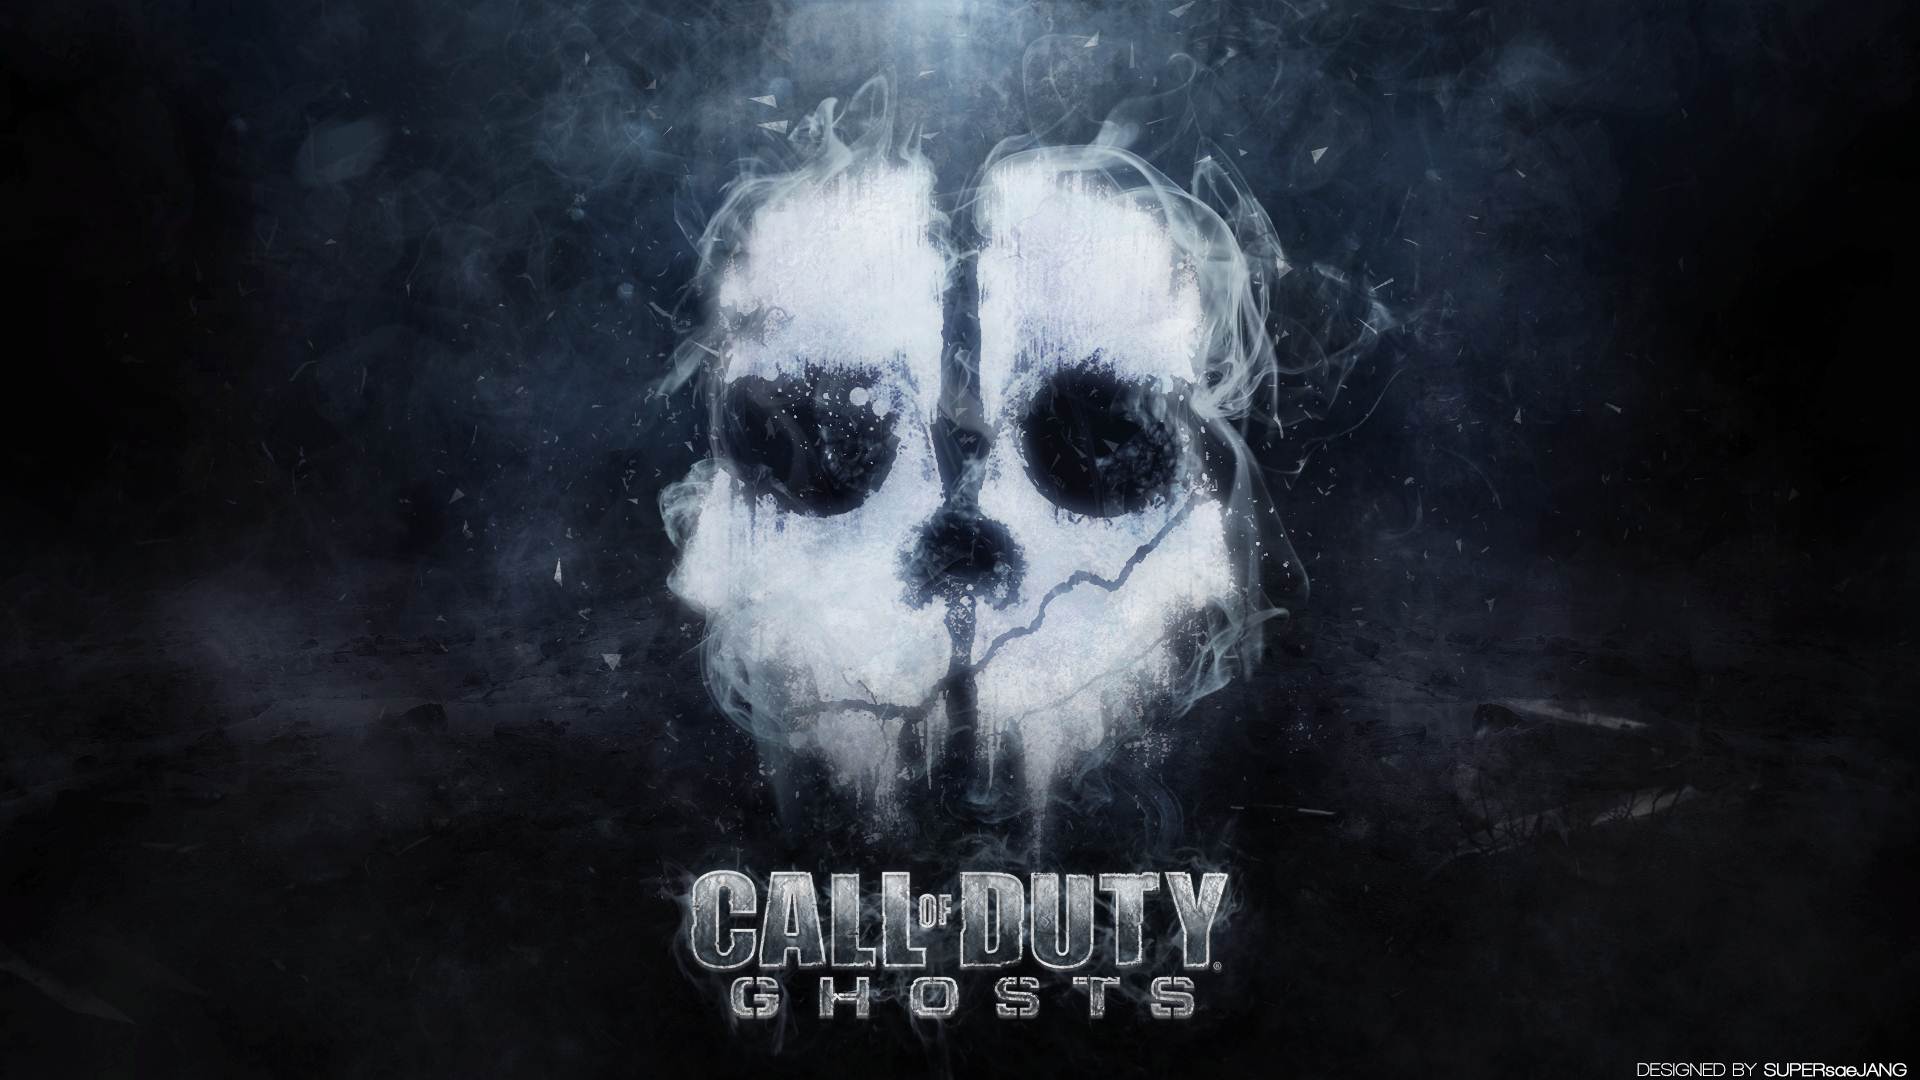 call of duty ghosts hd wallpapers GamingBoltcom Video Game News 1920x1080